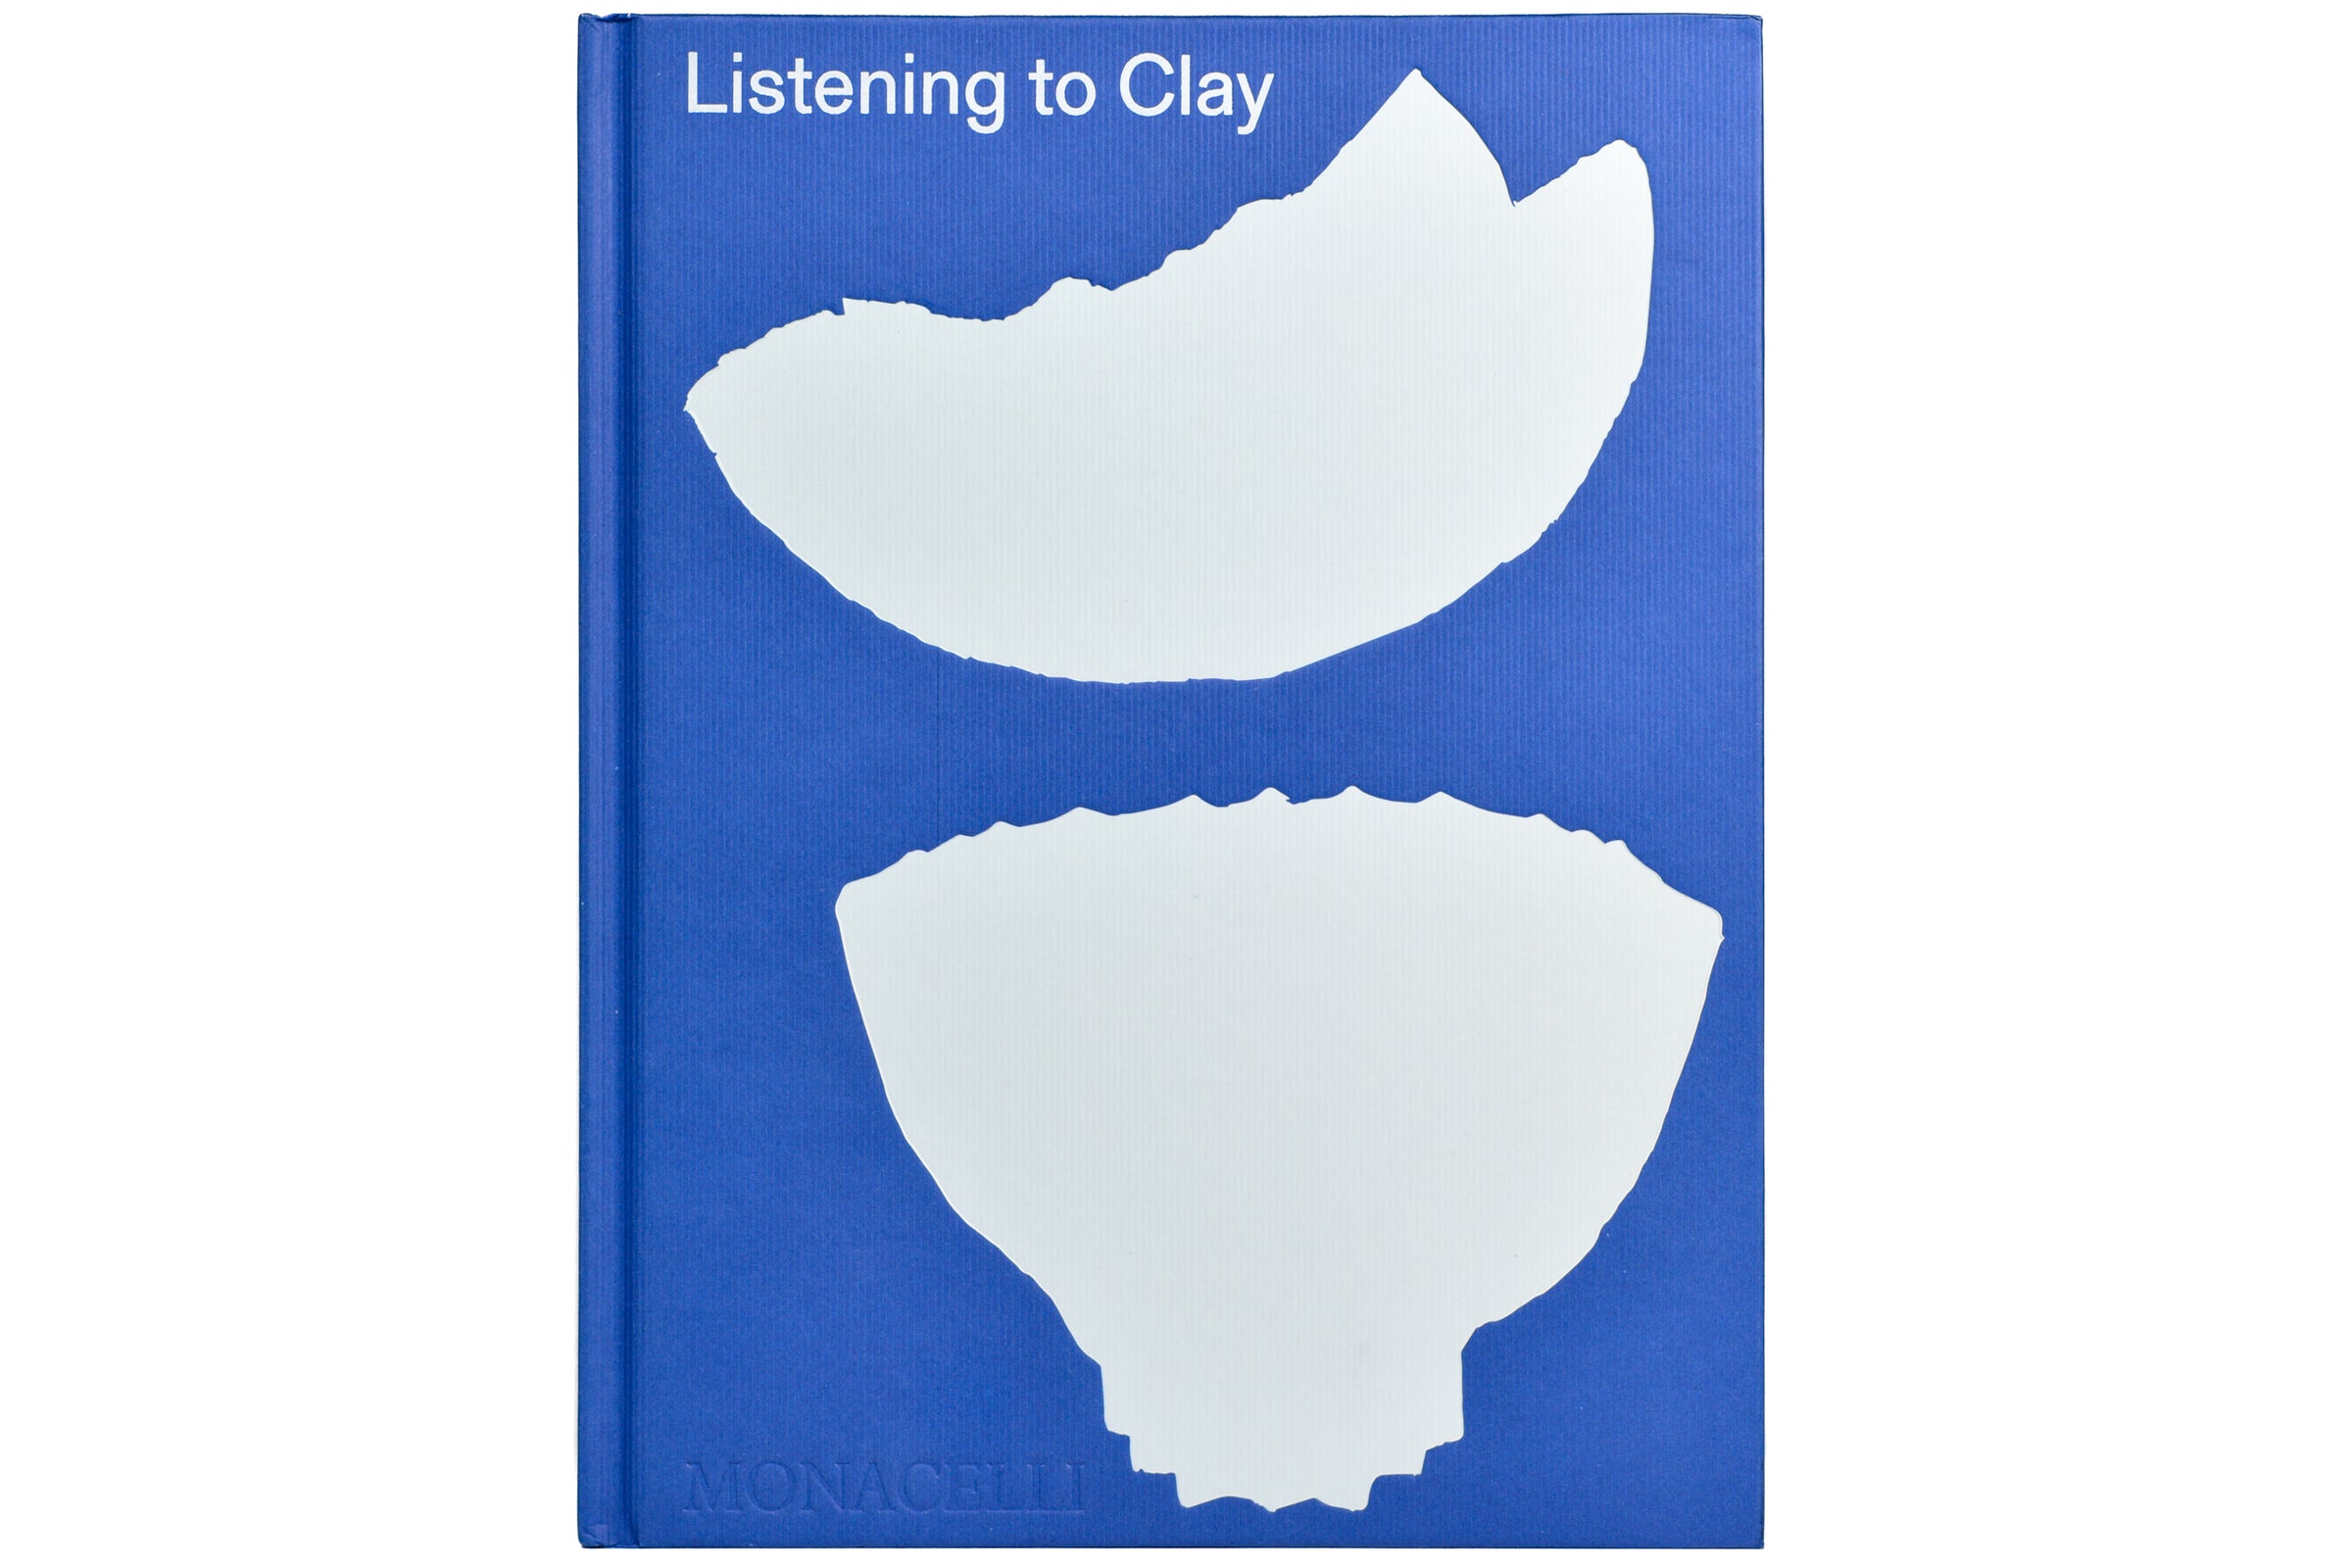 Music for Molding Clay: Experimental New Age Music for Art & Stress Relief  - Album by Art of Peace